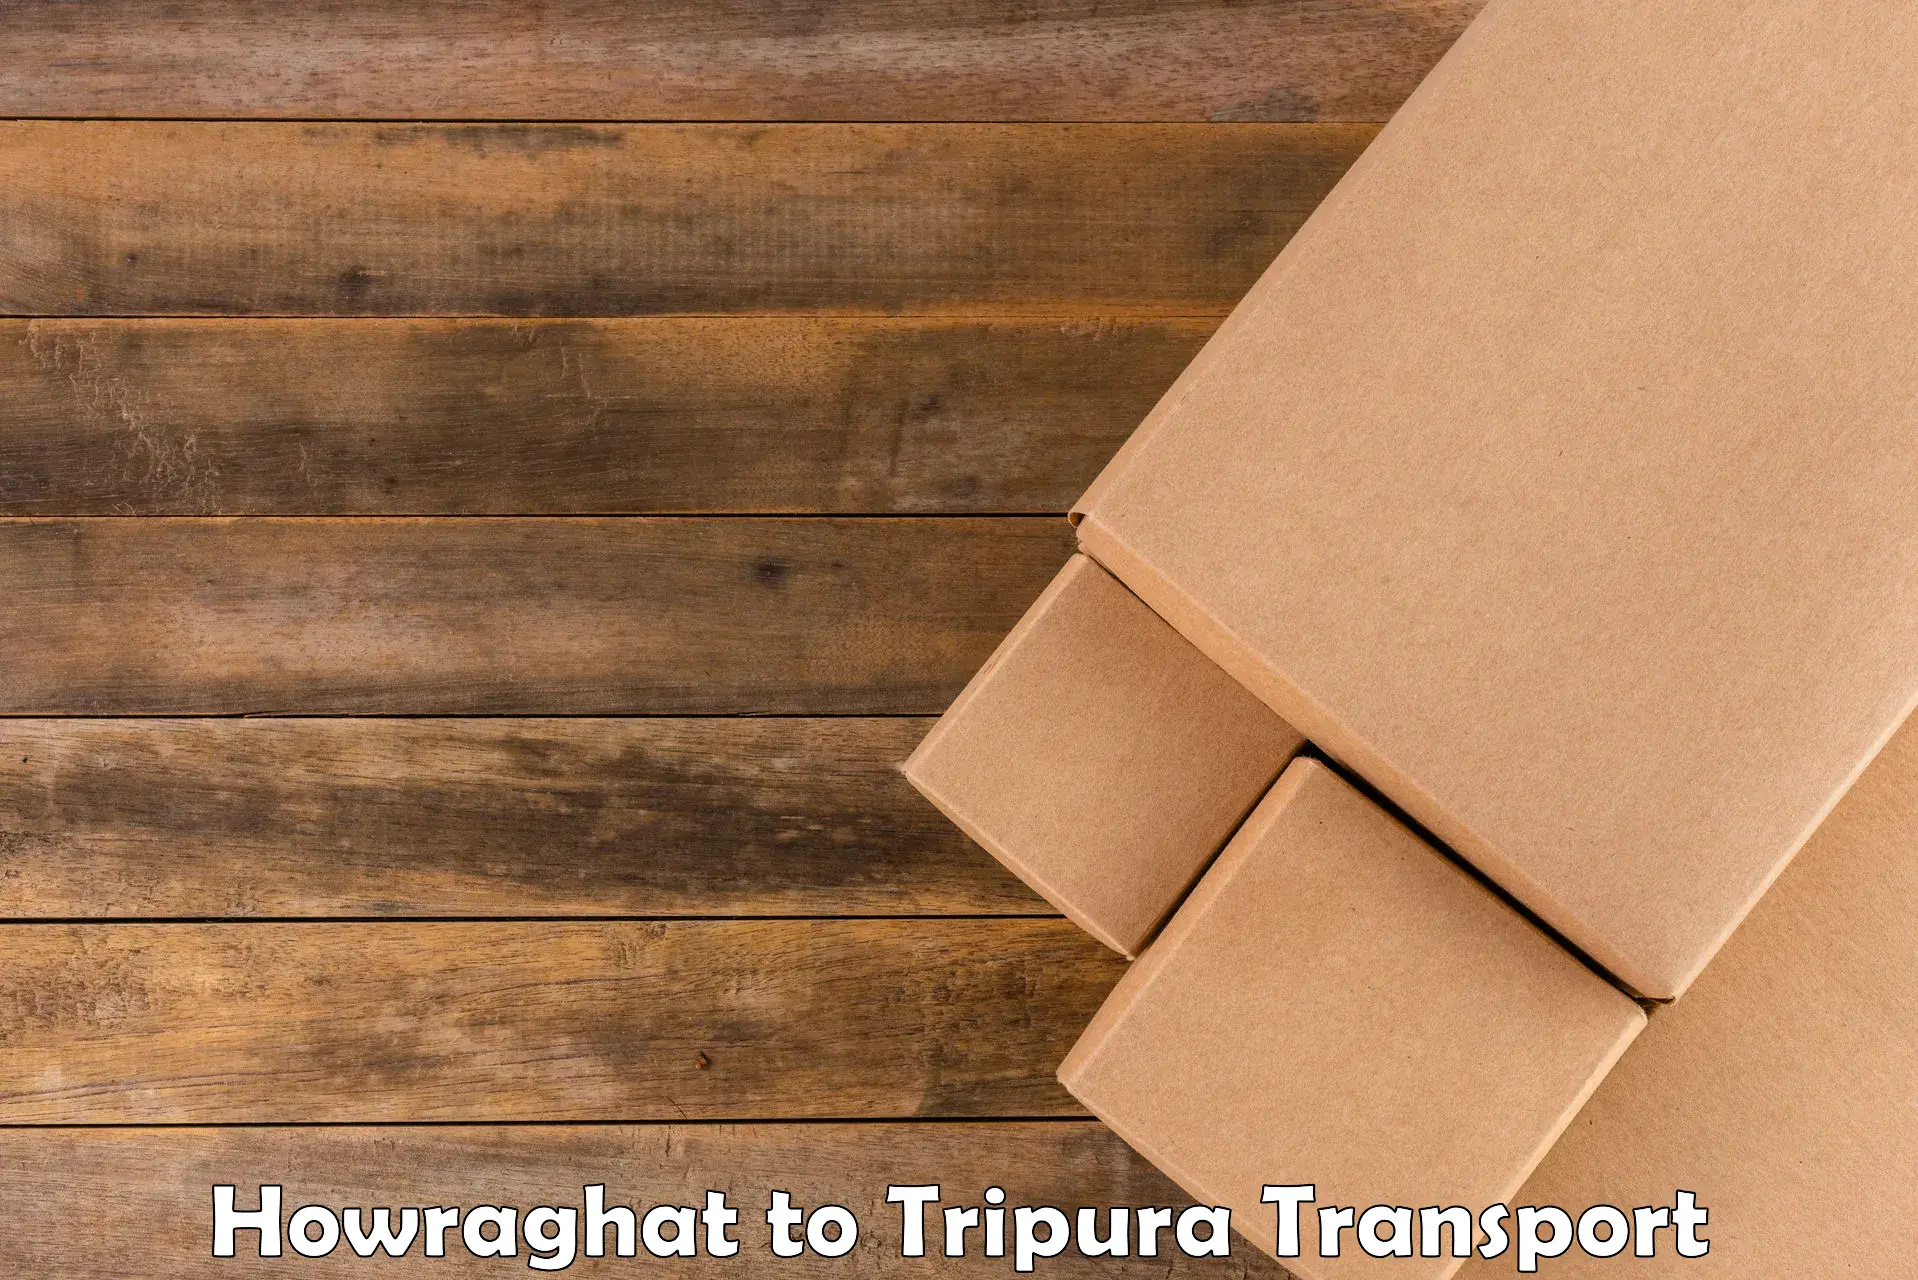 Transportation services Howraghat to Udaipur Tripura